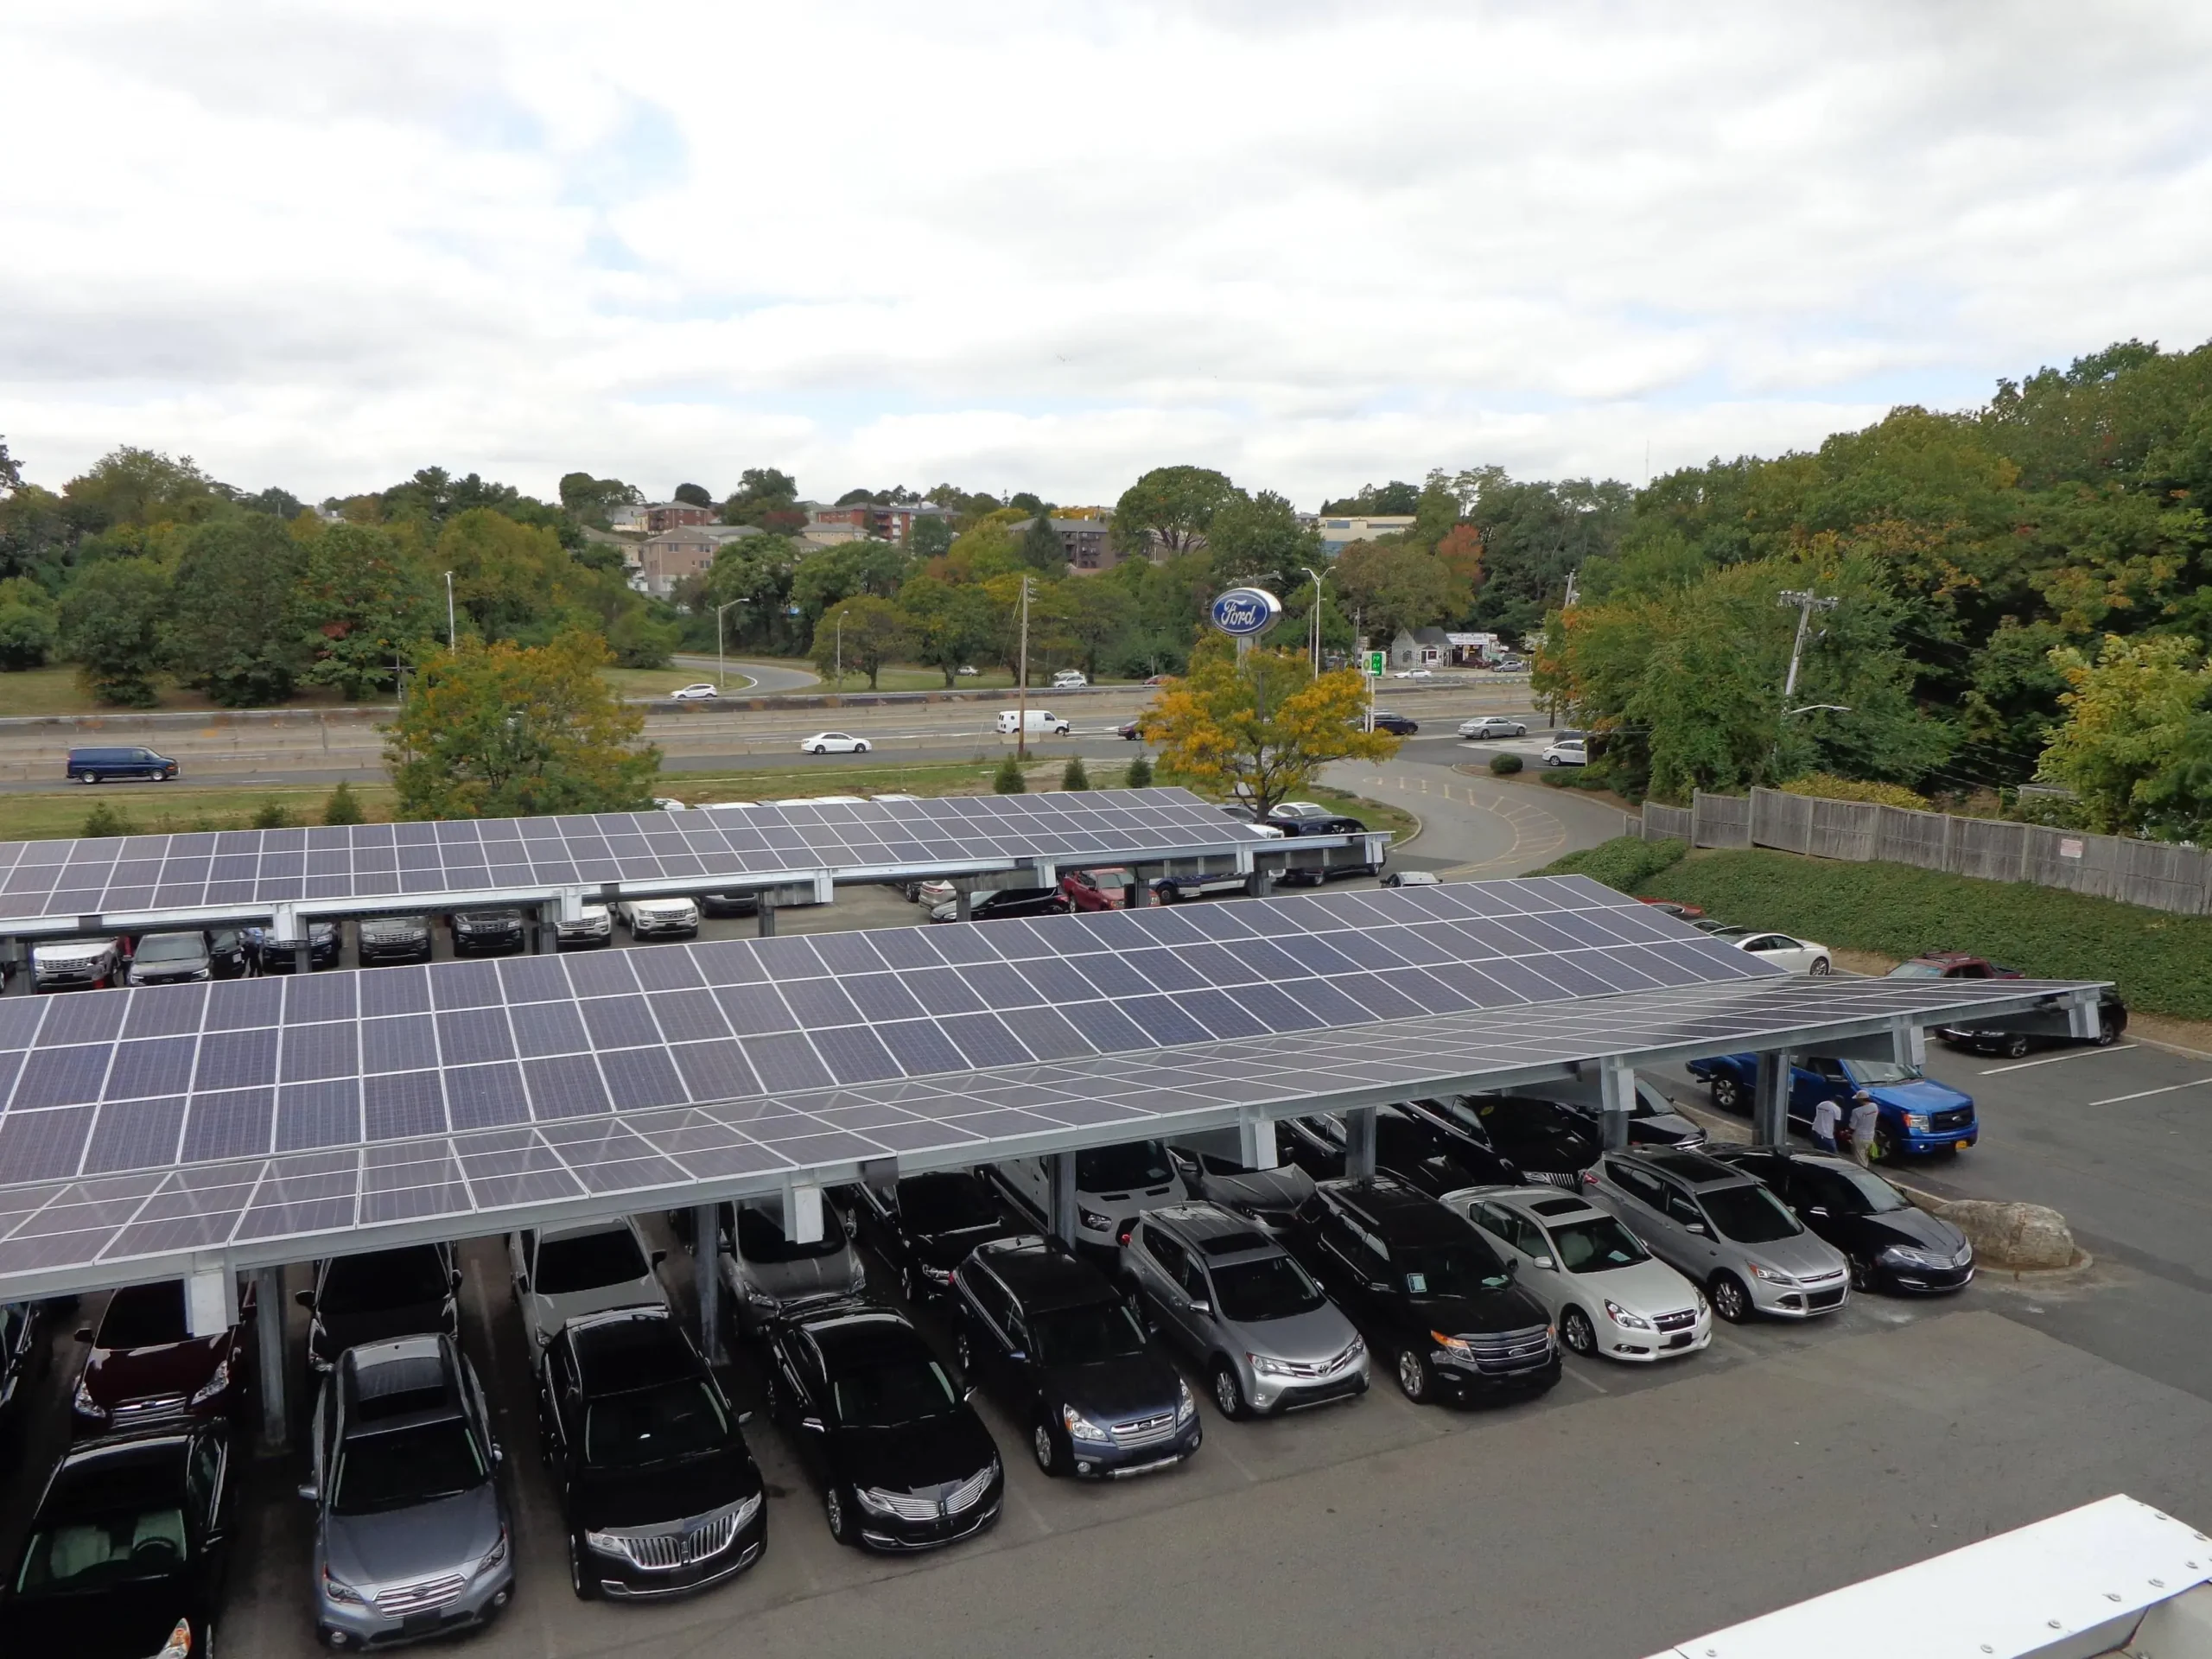 dealership for solar panels - What does a solar company do